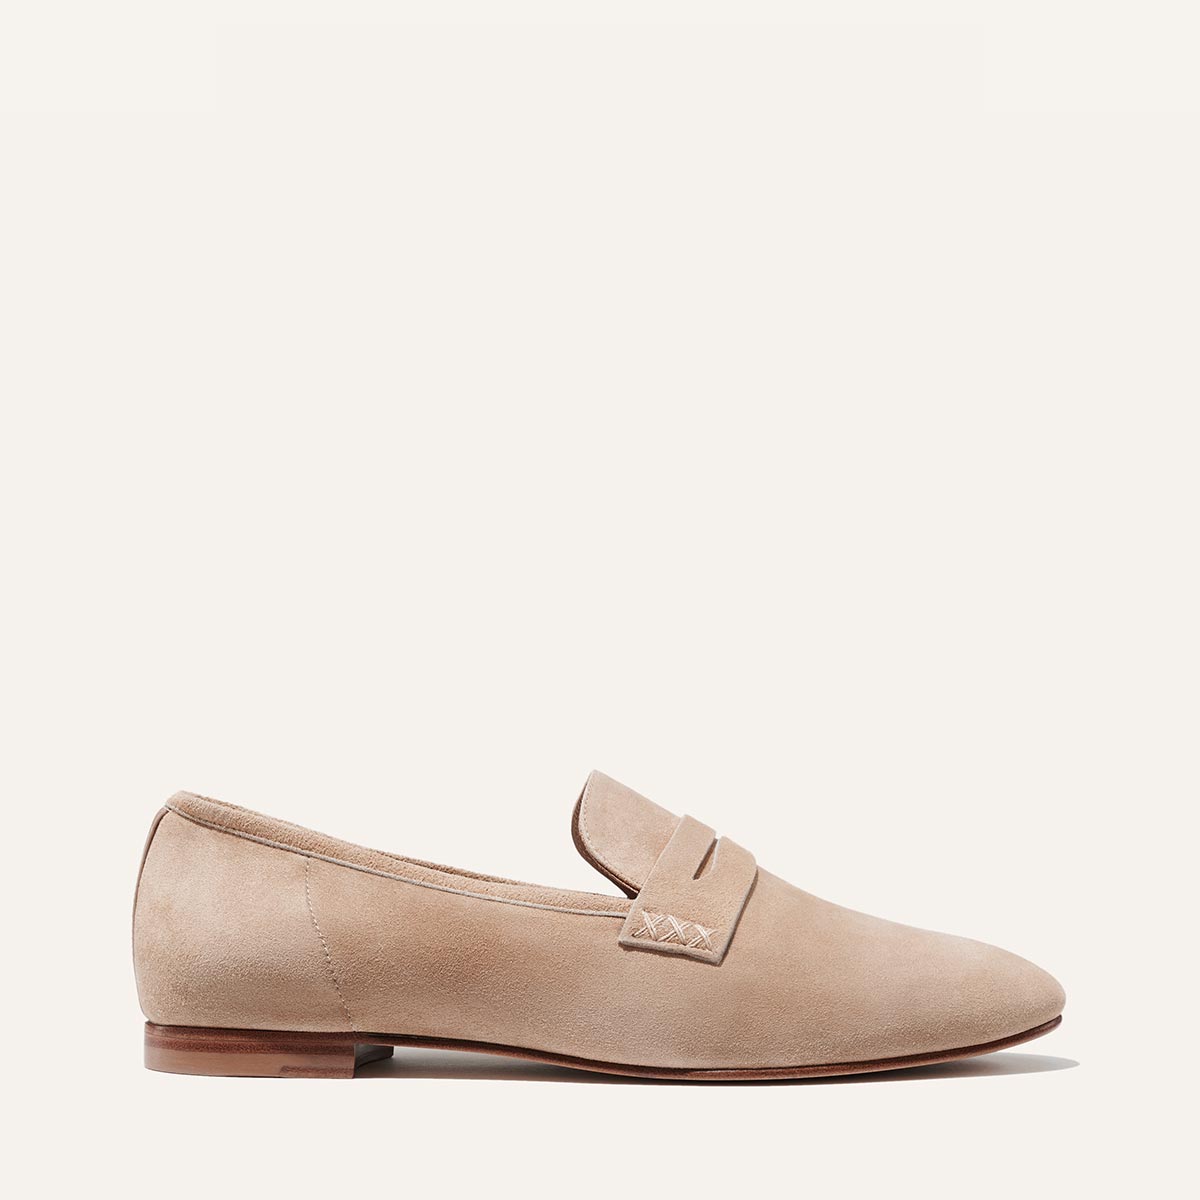 Margaux's classic and comfortable Penny loafer, made in a soft, neutral Italian suede